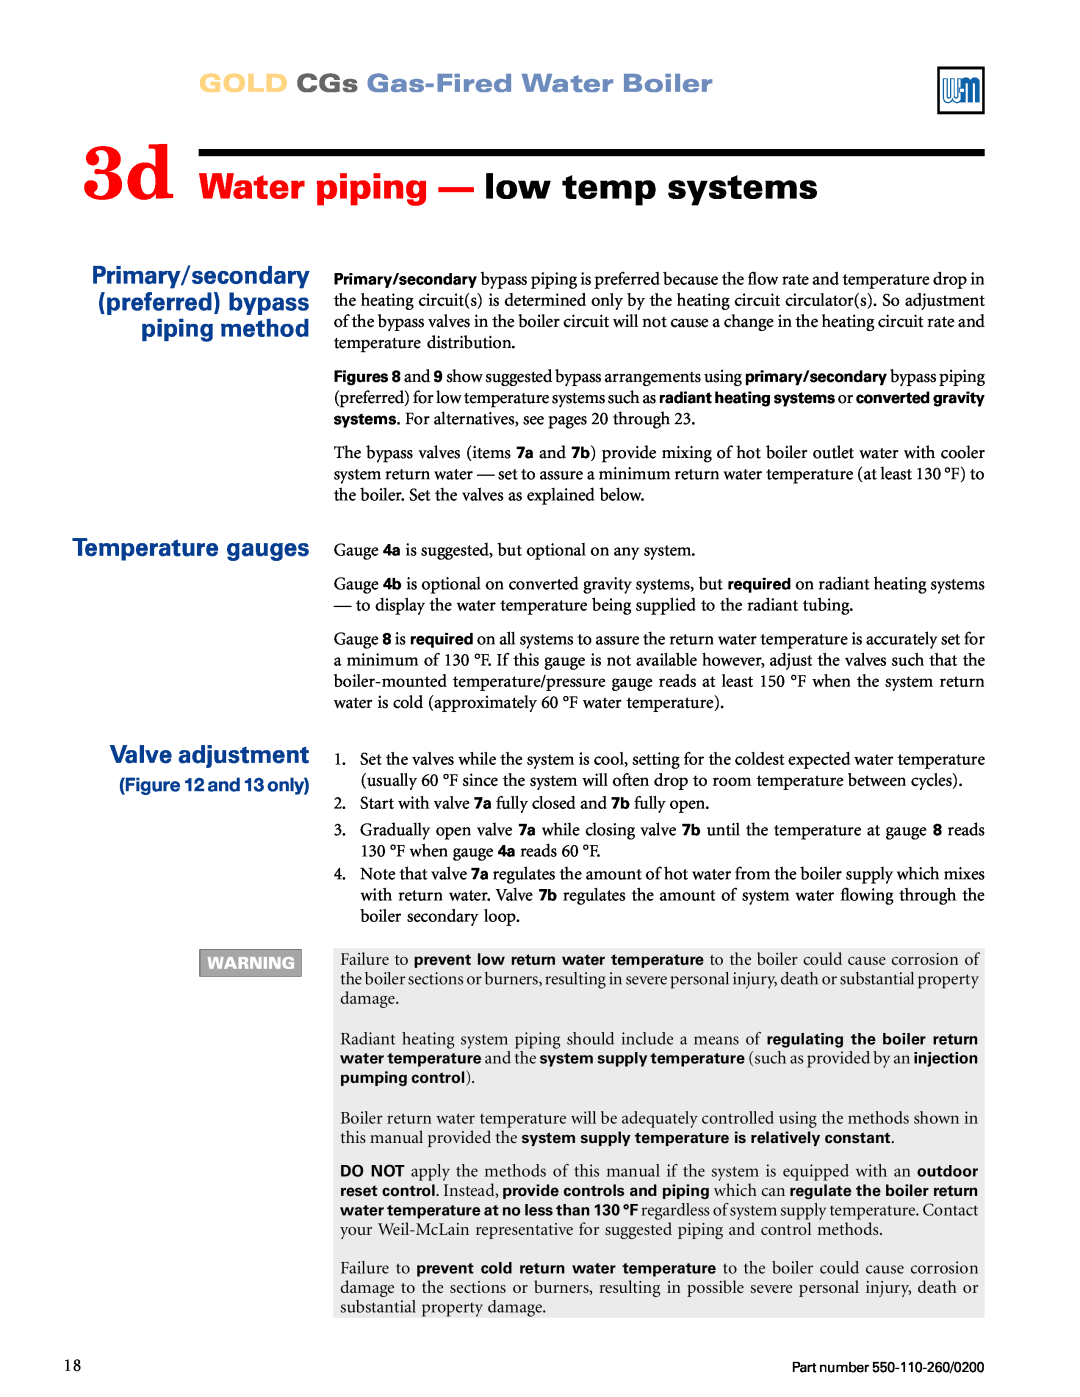 Weil-McLain 550-110-260/02002 manual 3d Water piping — low temp systems, Temperature gauges Valve adjustment, and 13 only 